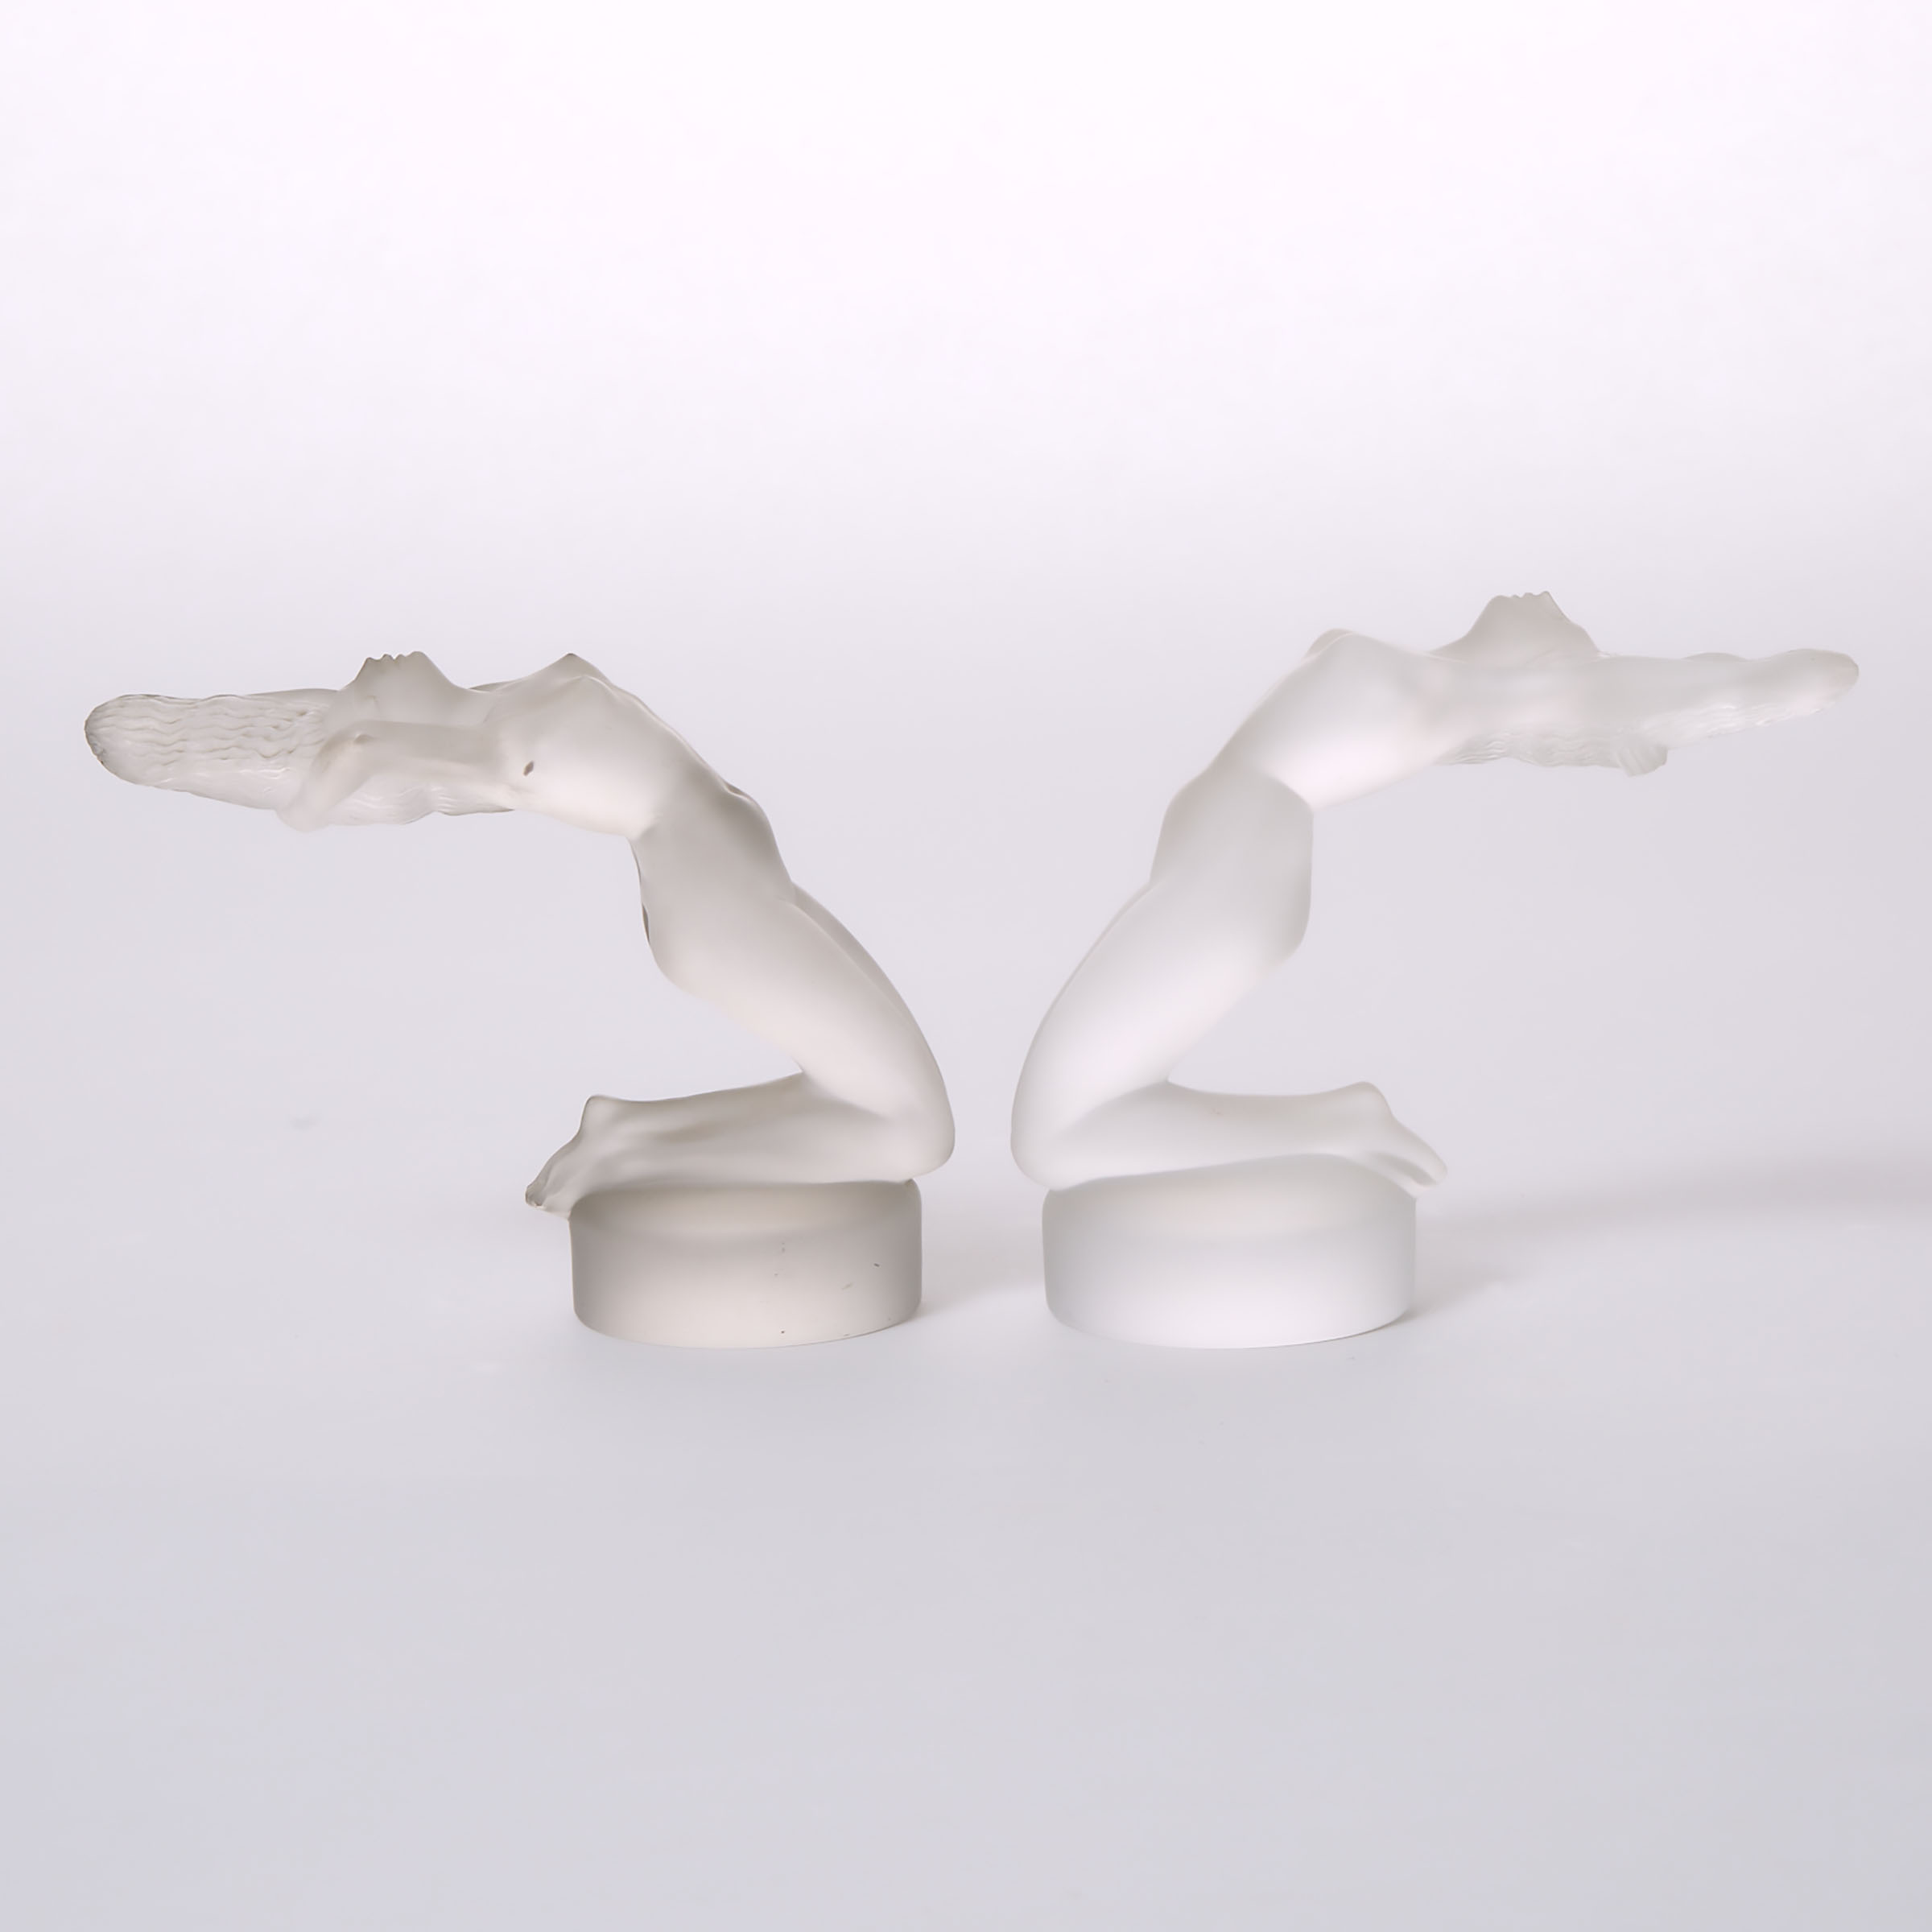 'Chrysis', Pair of Lalique Moulded and Frosted Glass Figures, post-1945